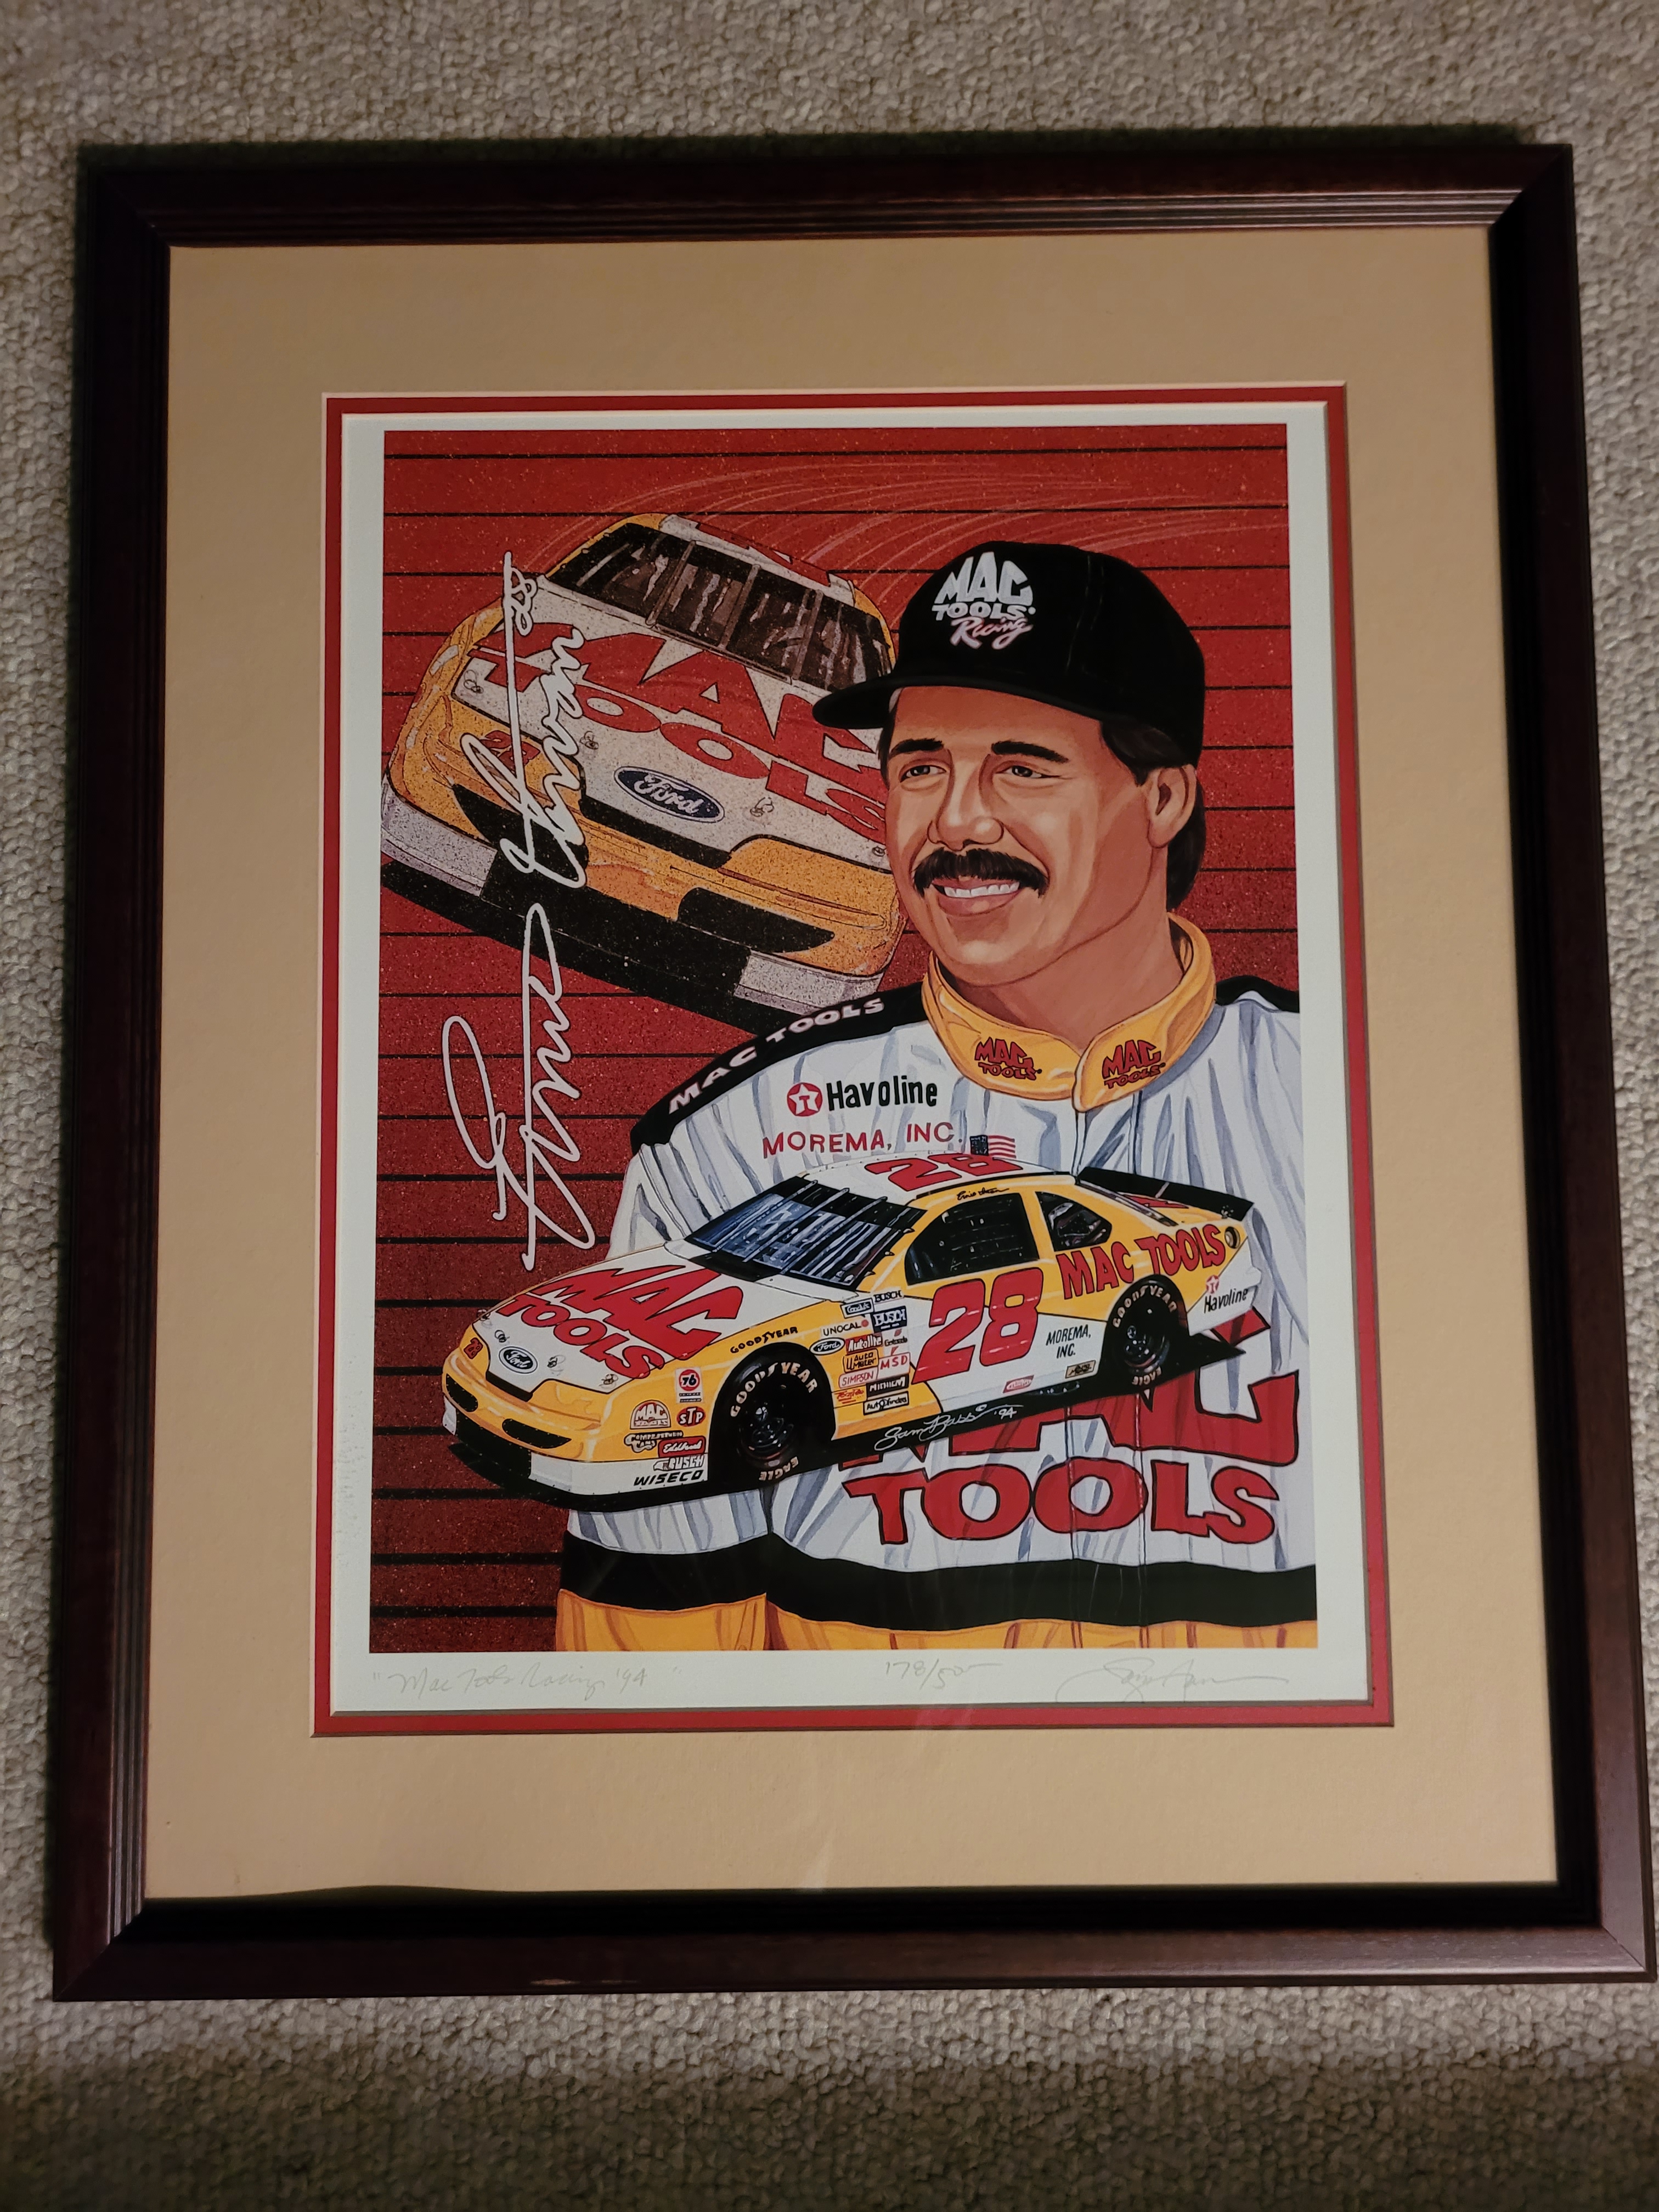 0th Image of a 1994 ERNIE IRVAN # 28 PICTURE